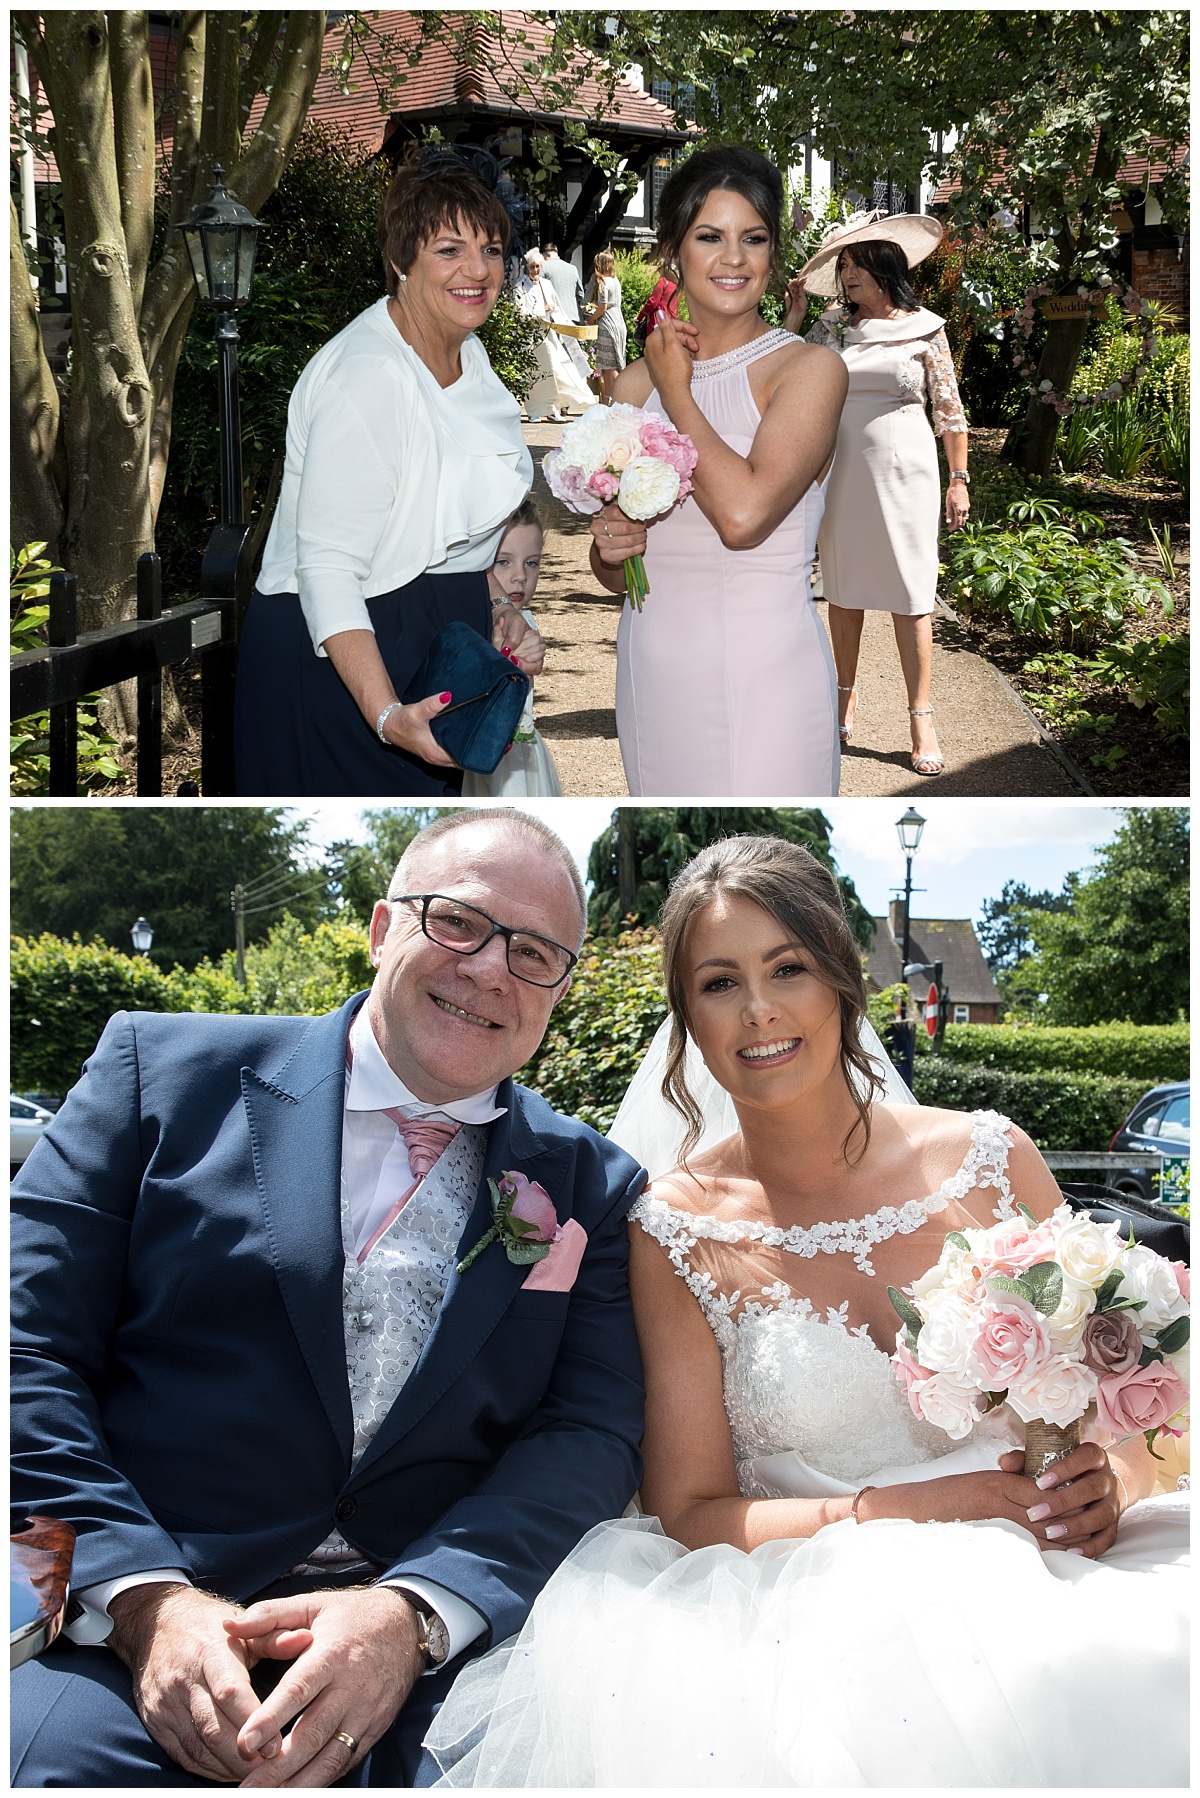 Wedding Photography Manchester - Melissa and Stuarts Mere Golf Resort And Spa Wedding Day 29